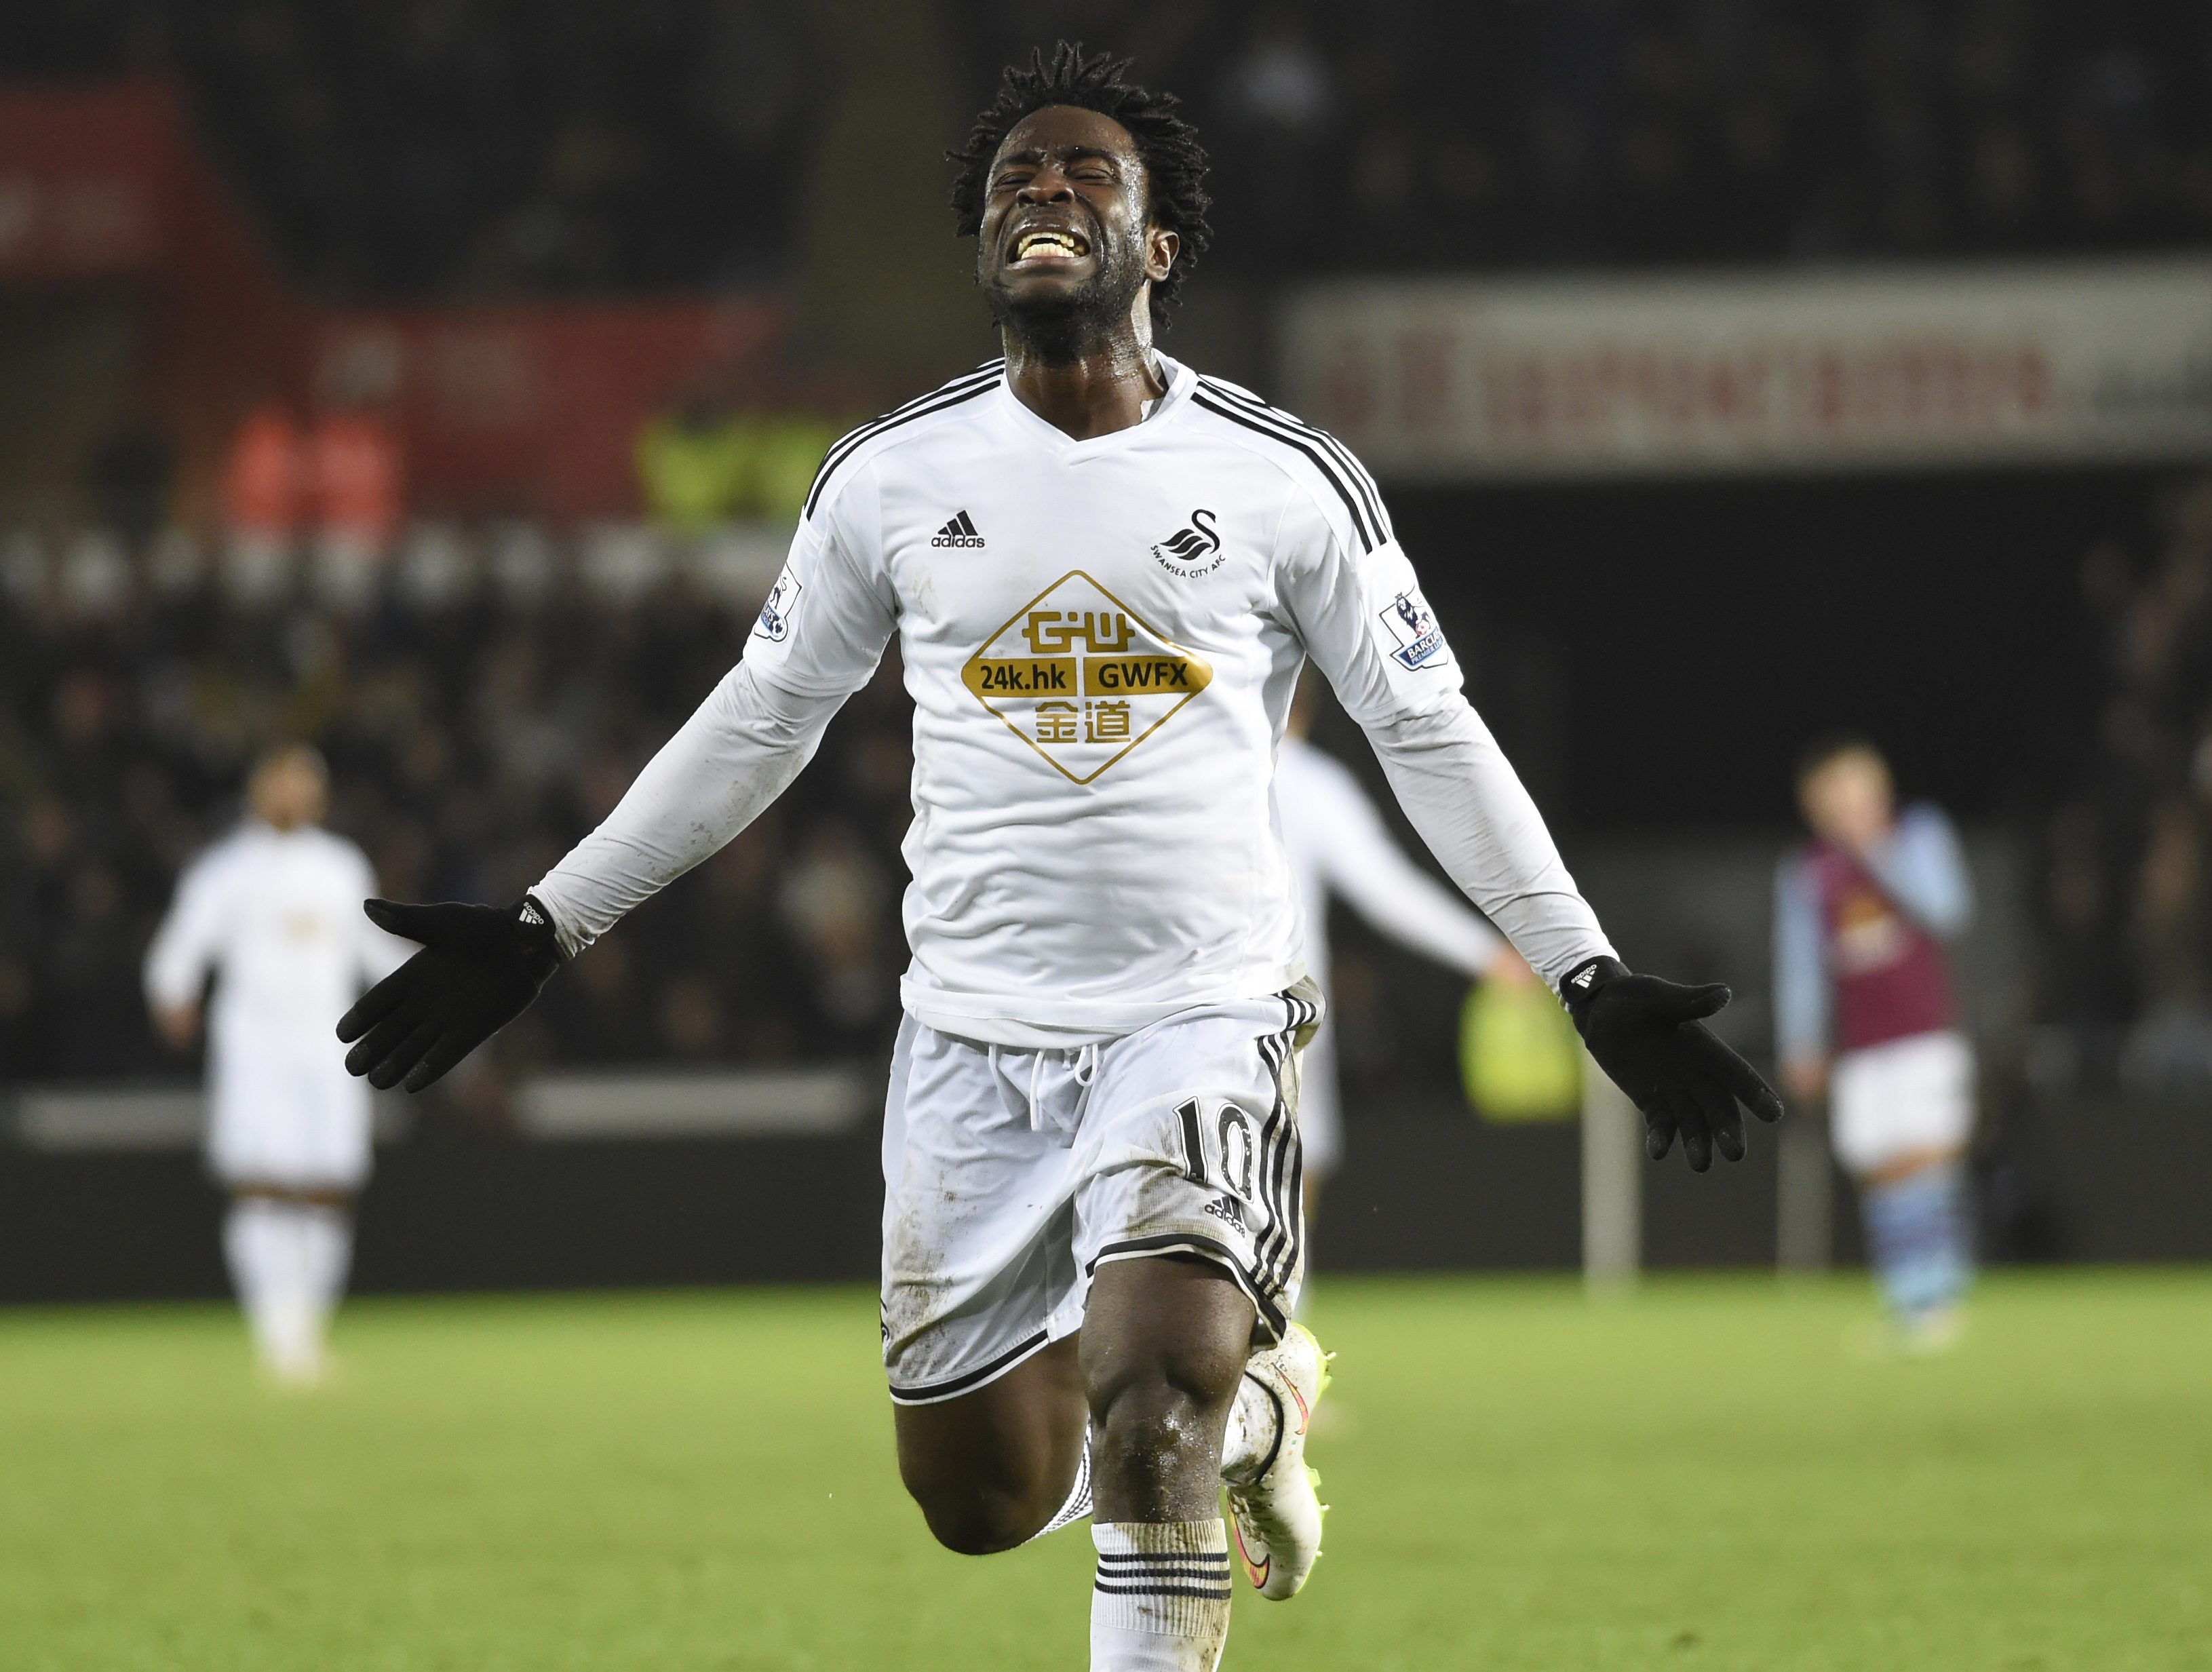 Swansea City's Wilfried Bony celebrates scoring a goal, that was later disallowed, during their English Premier League soccer match at the Liberty Stadium in Swansea